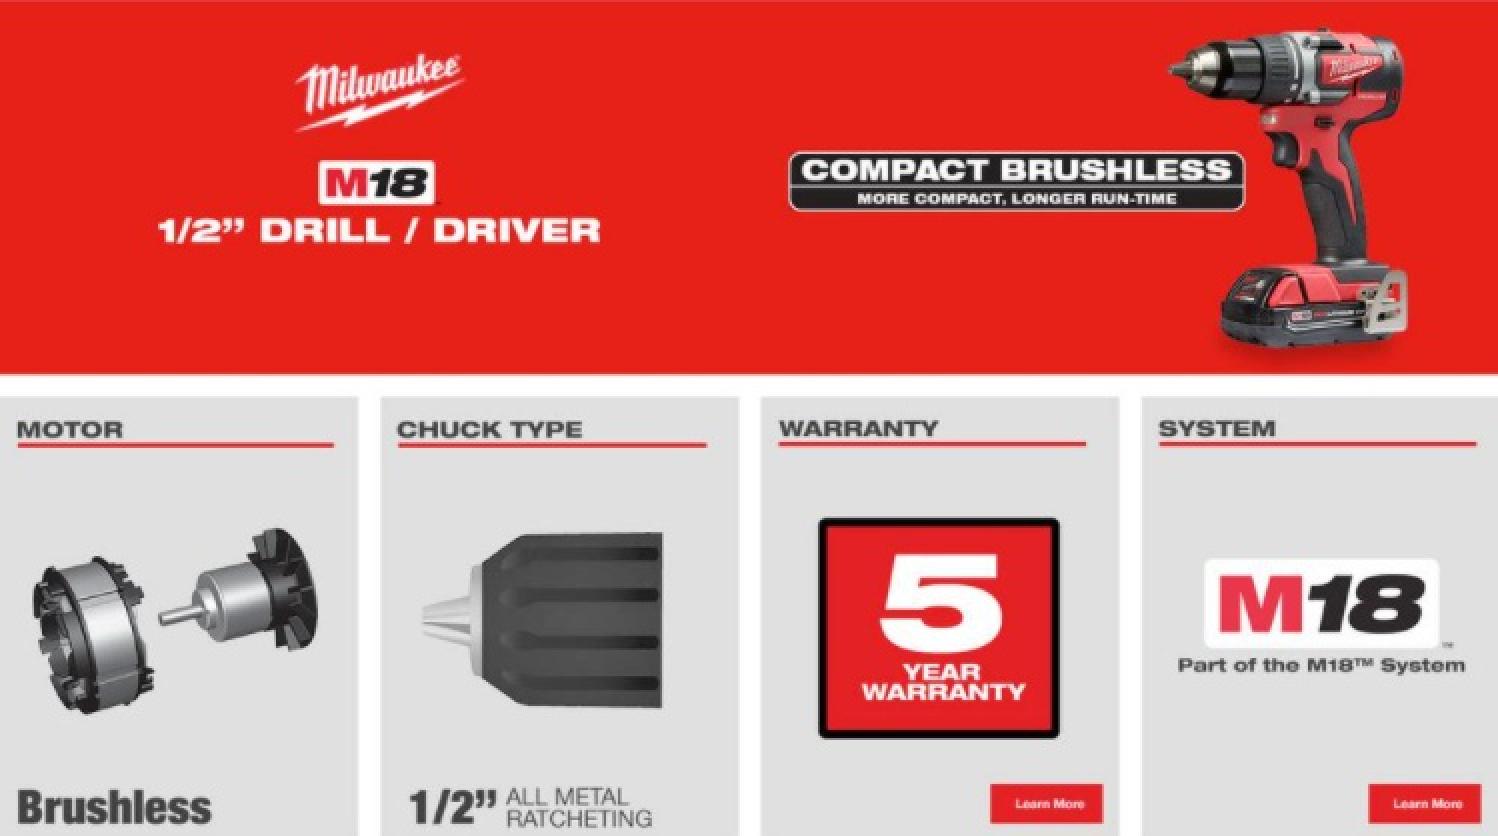 Milwaukee M18 Compact Brushless 1/2" Drill/Driver Kit Info